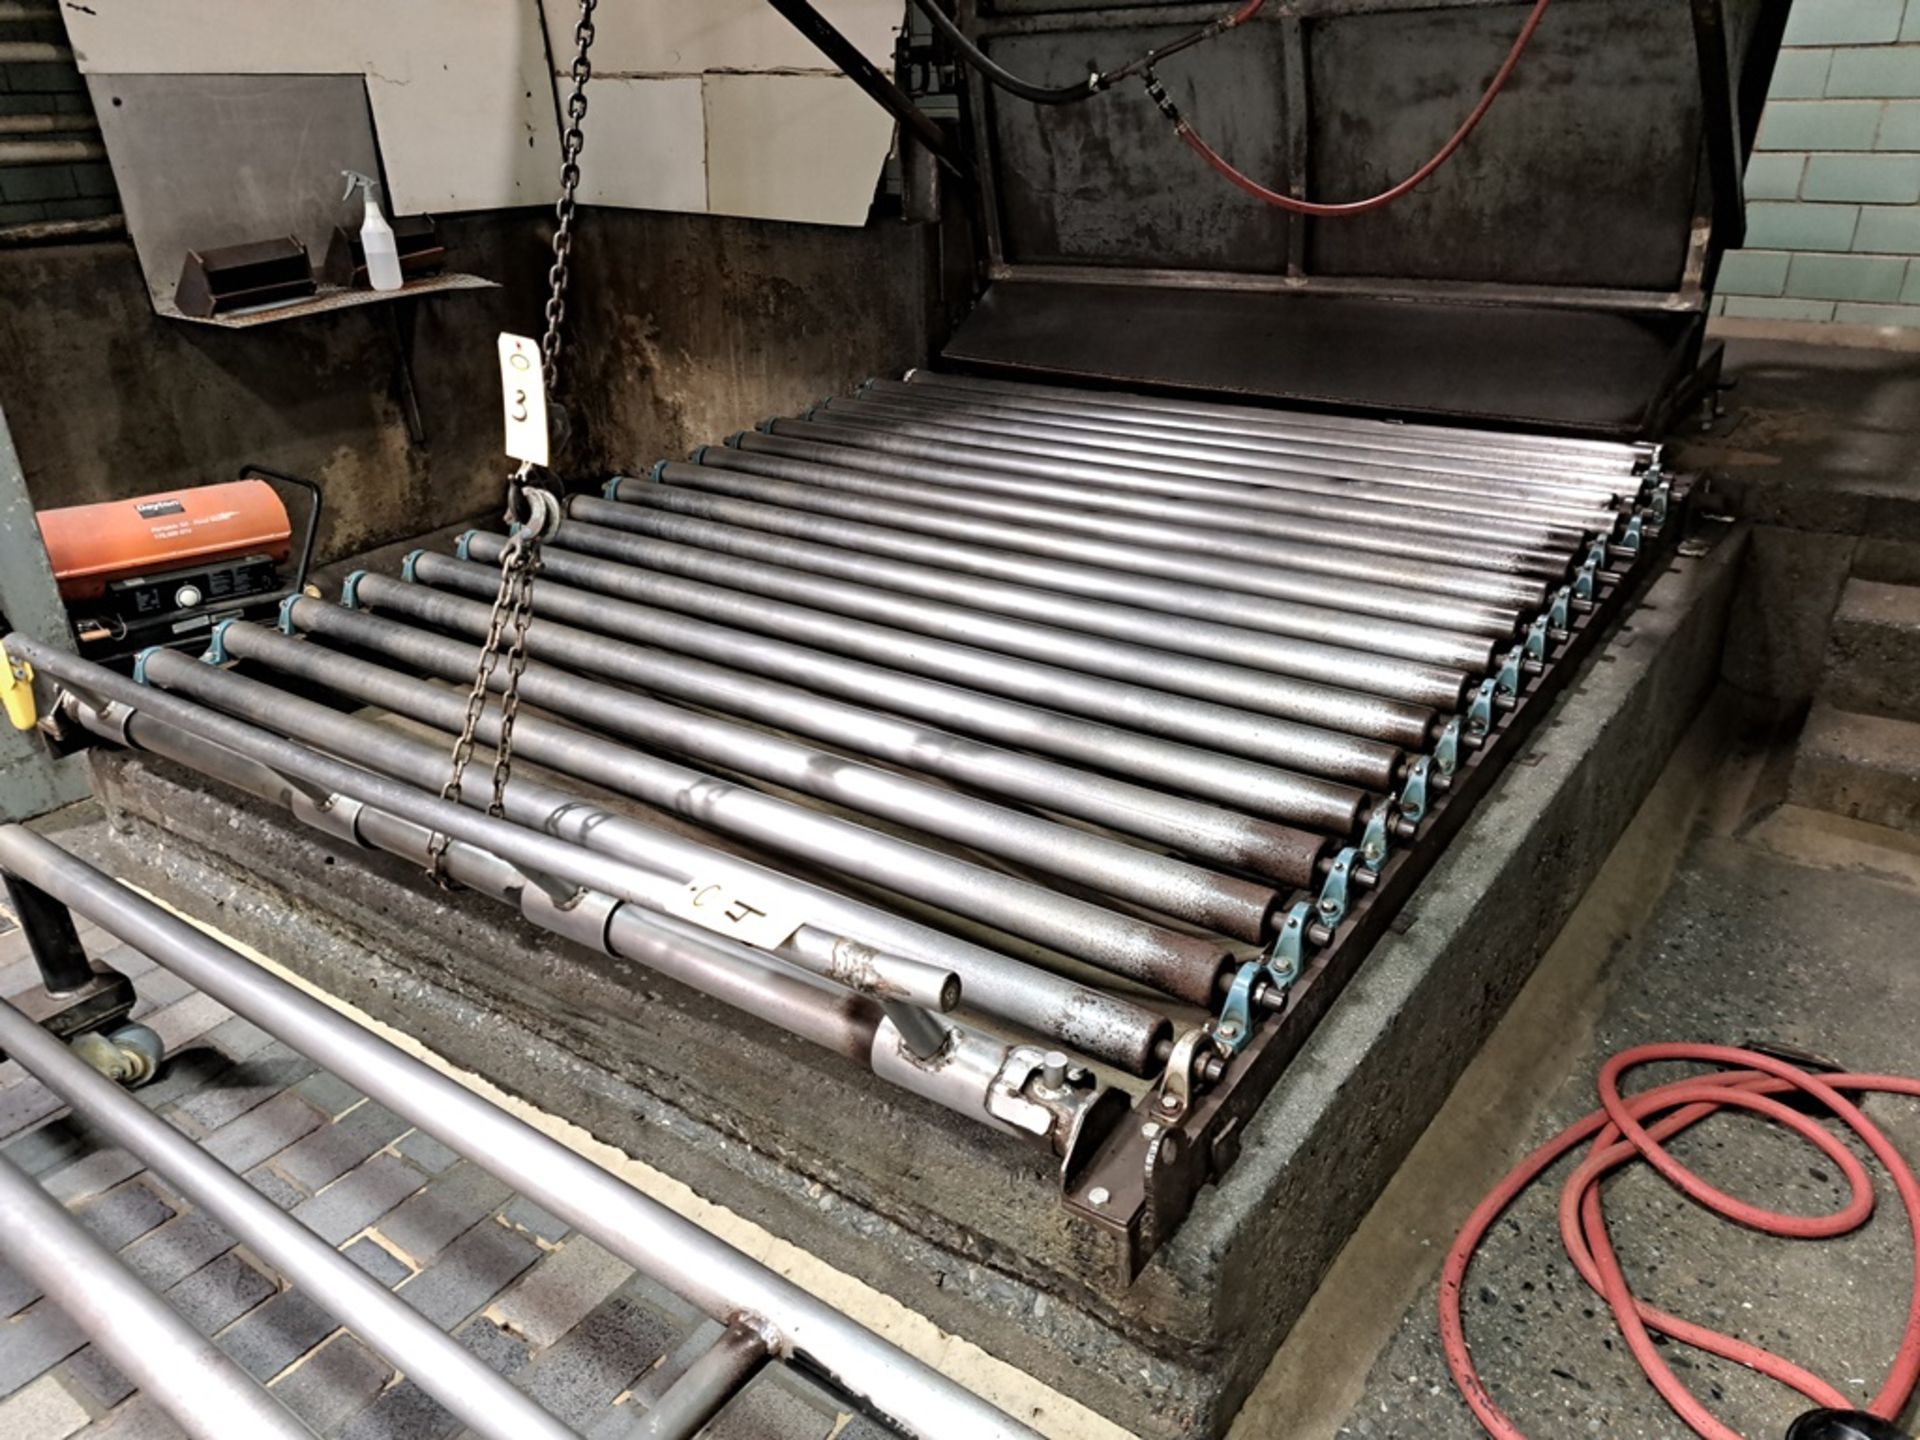 Stainless Steel Landing Table with rollers, 7' W X 8' L (Required Loading Fee $250.00 Rigger: Norm